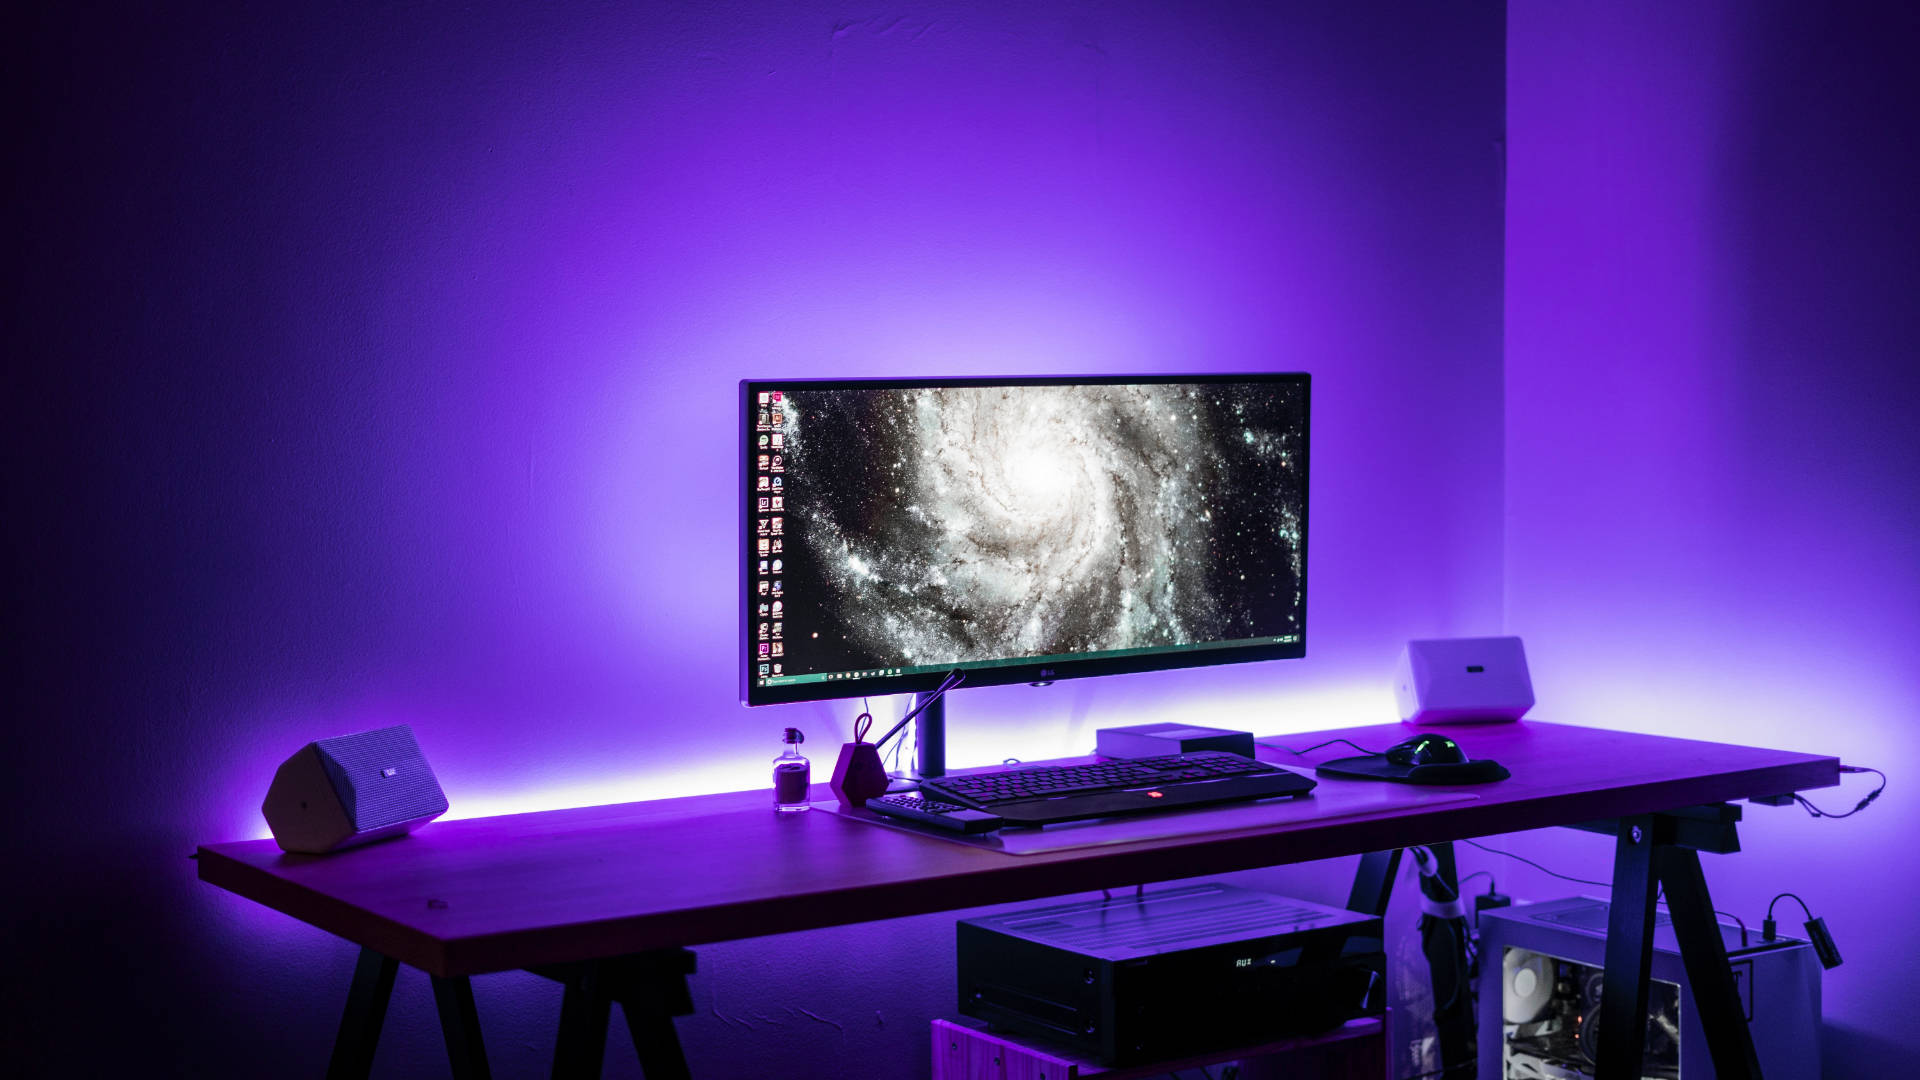 A High-end Gaming Setup In A Purple Themed Room Background